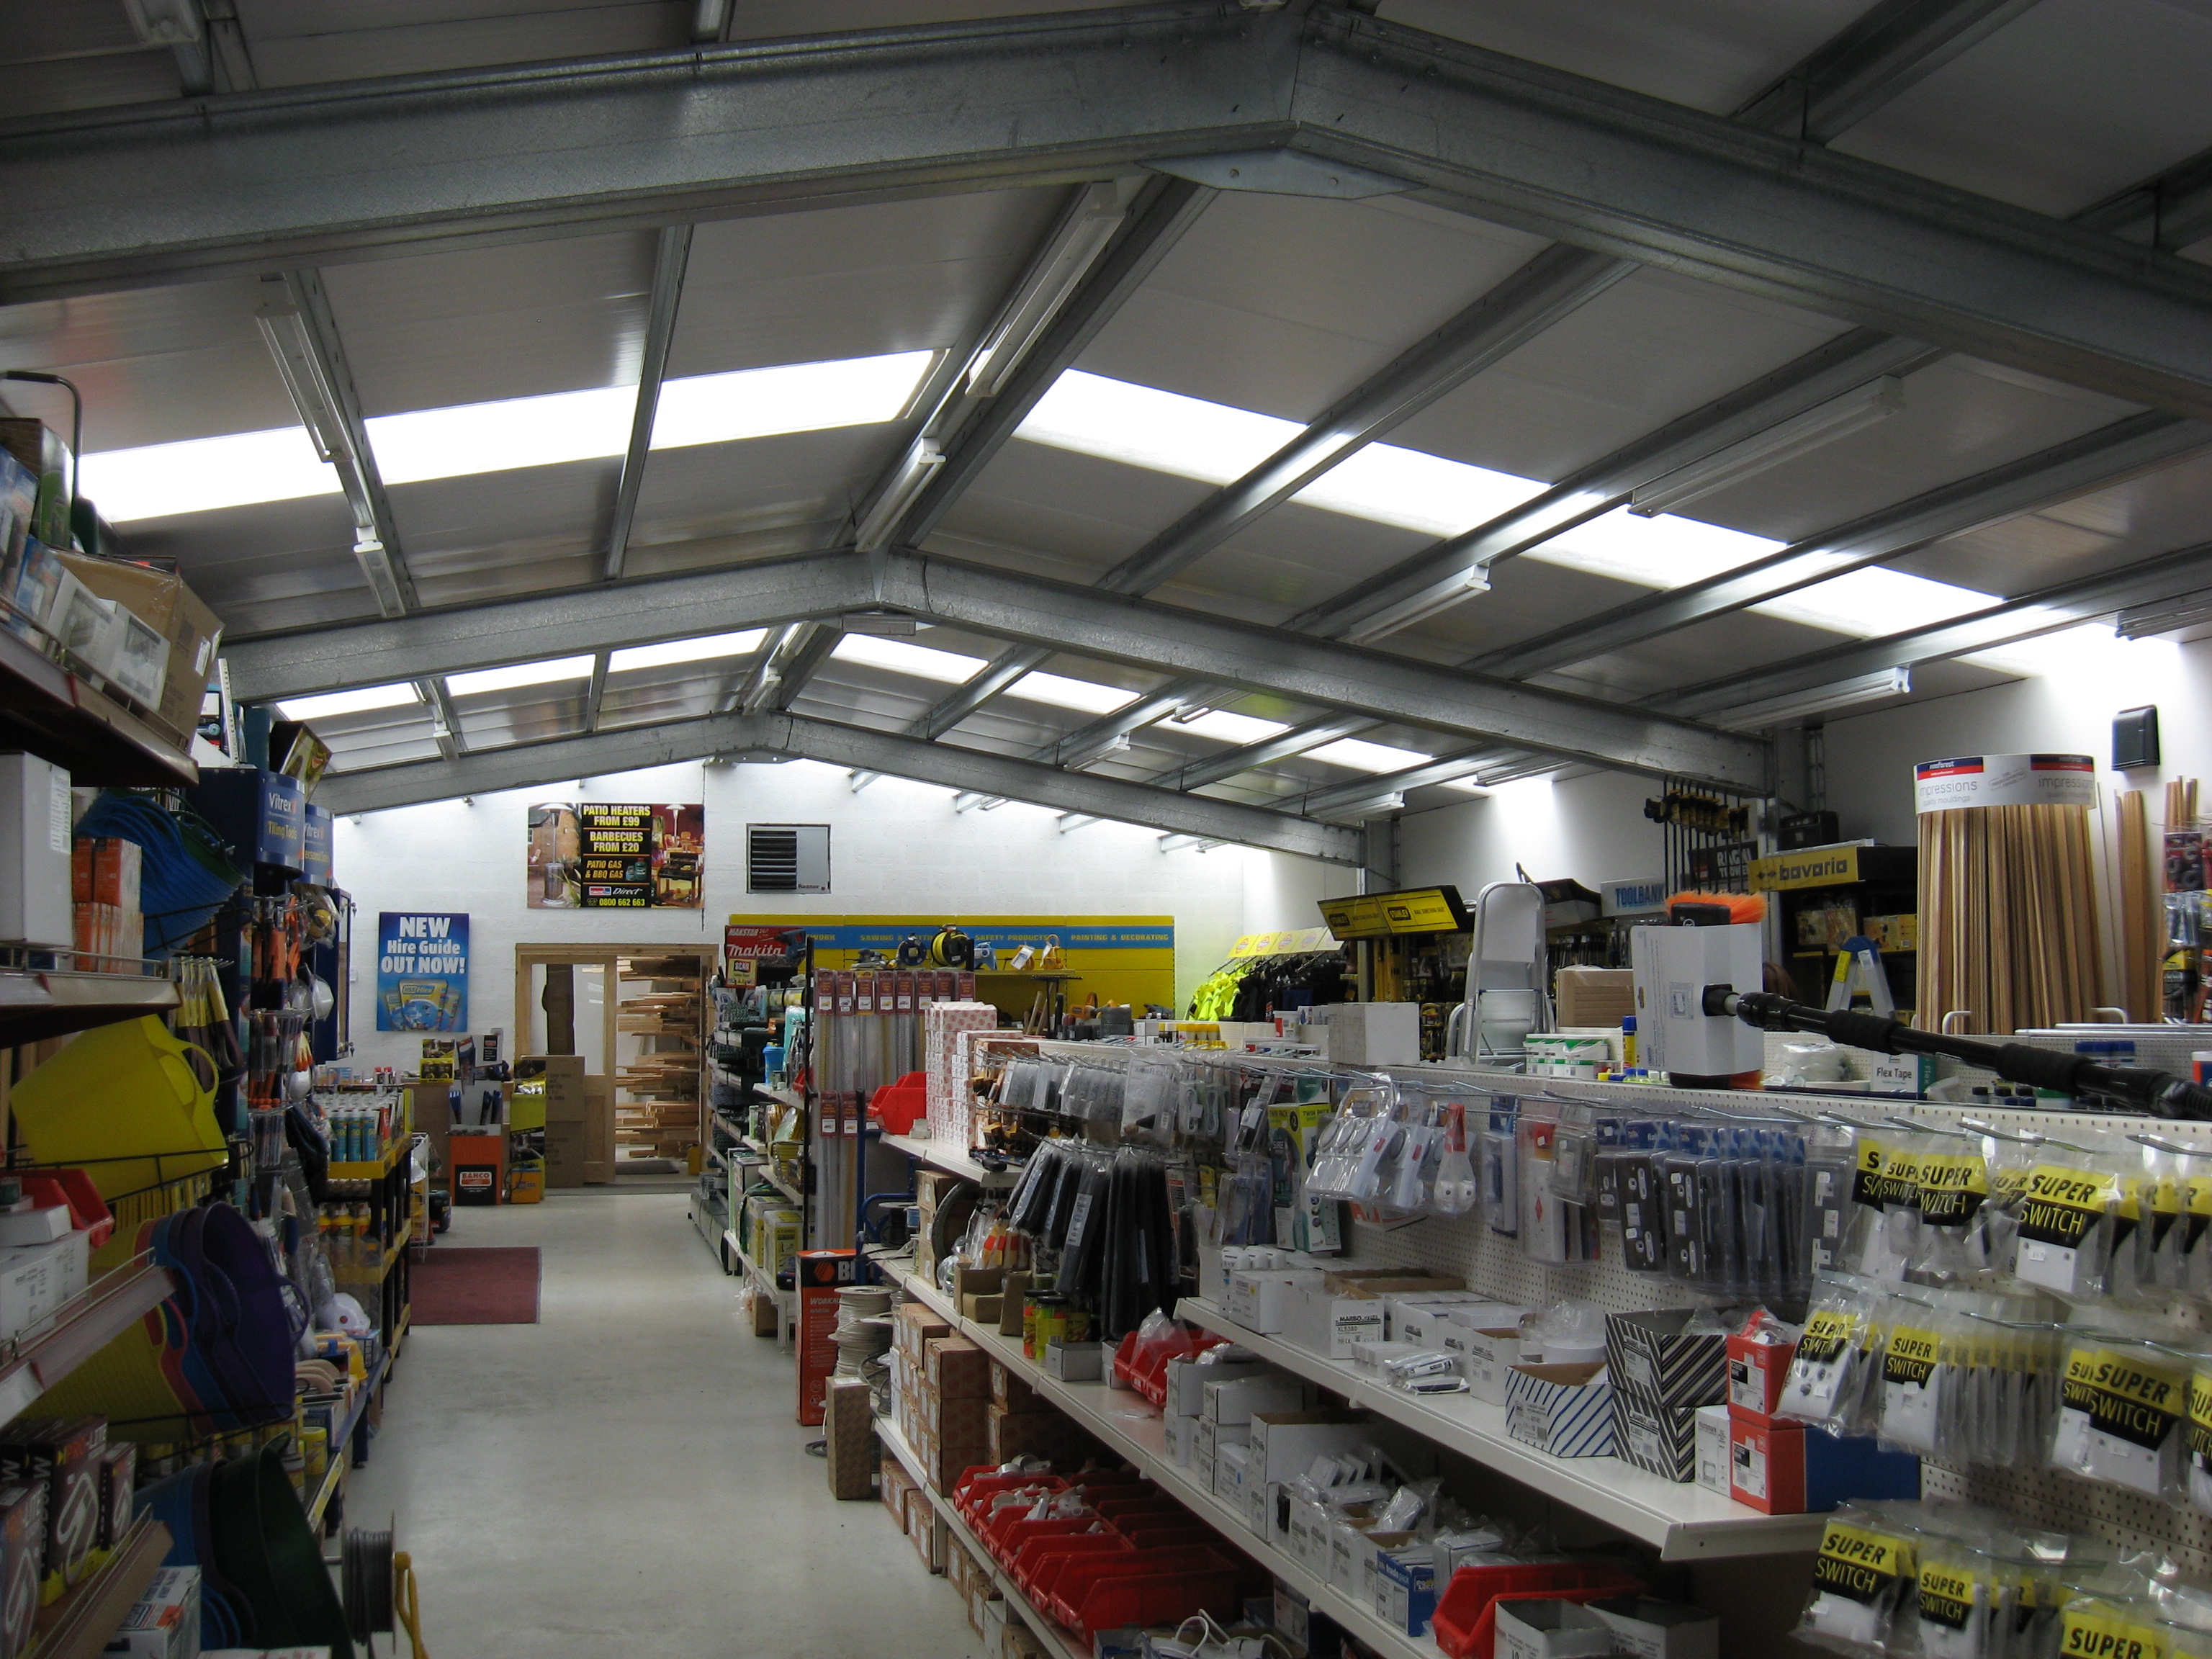 Commercial Steel Buildings For Retail Outlet In Derbyshire